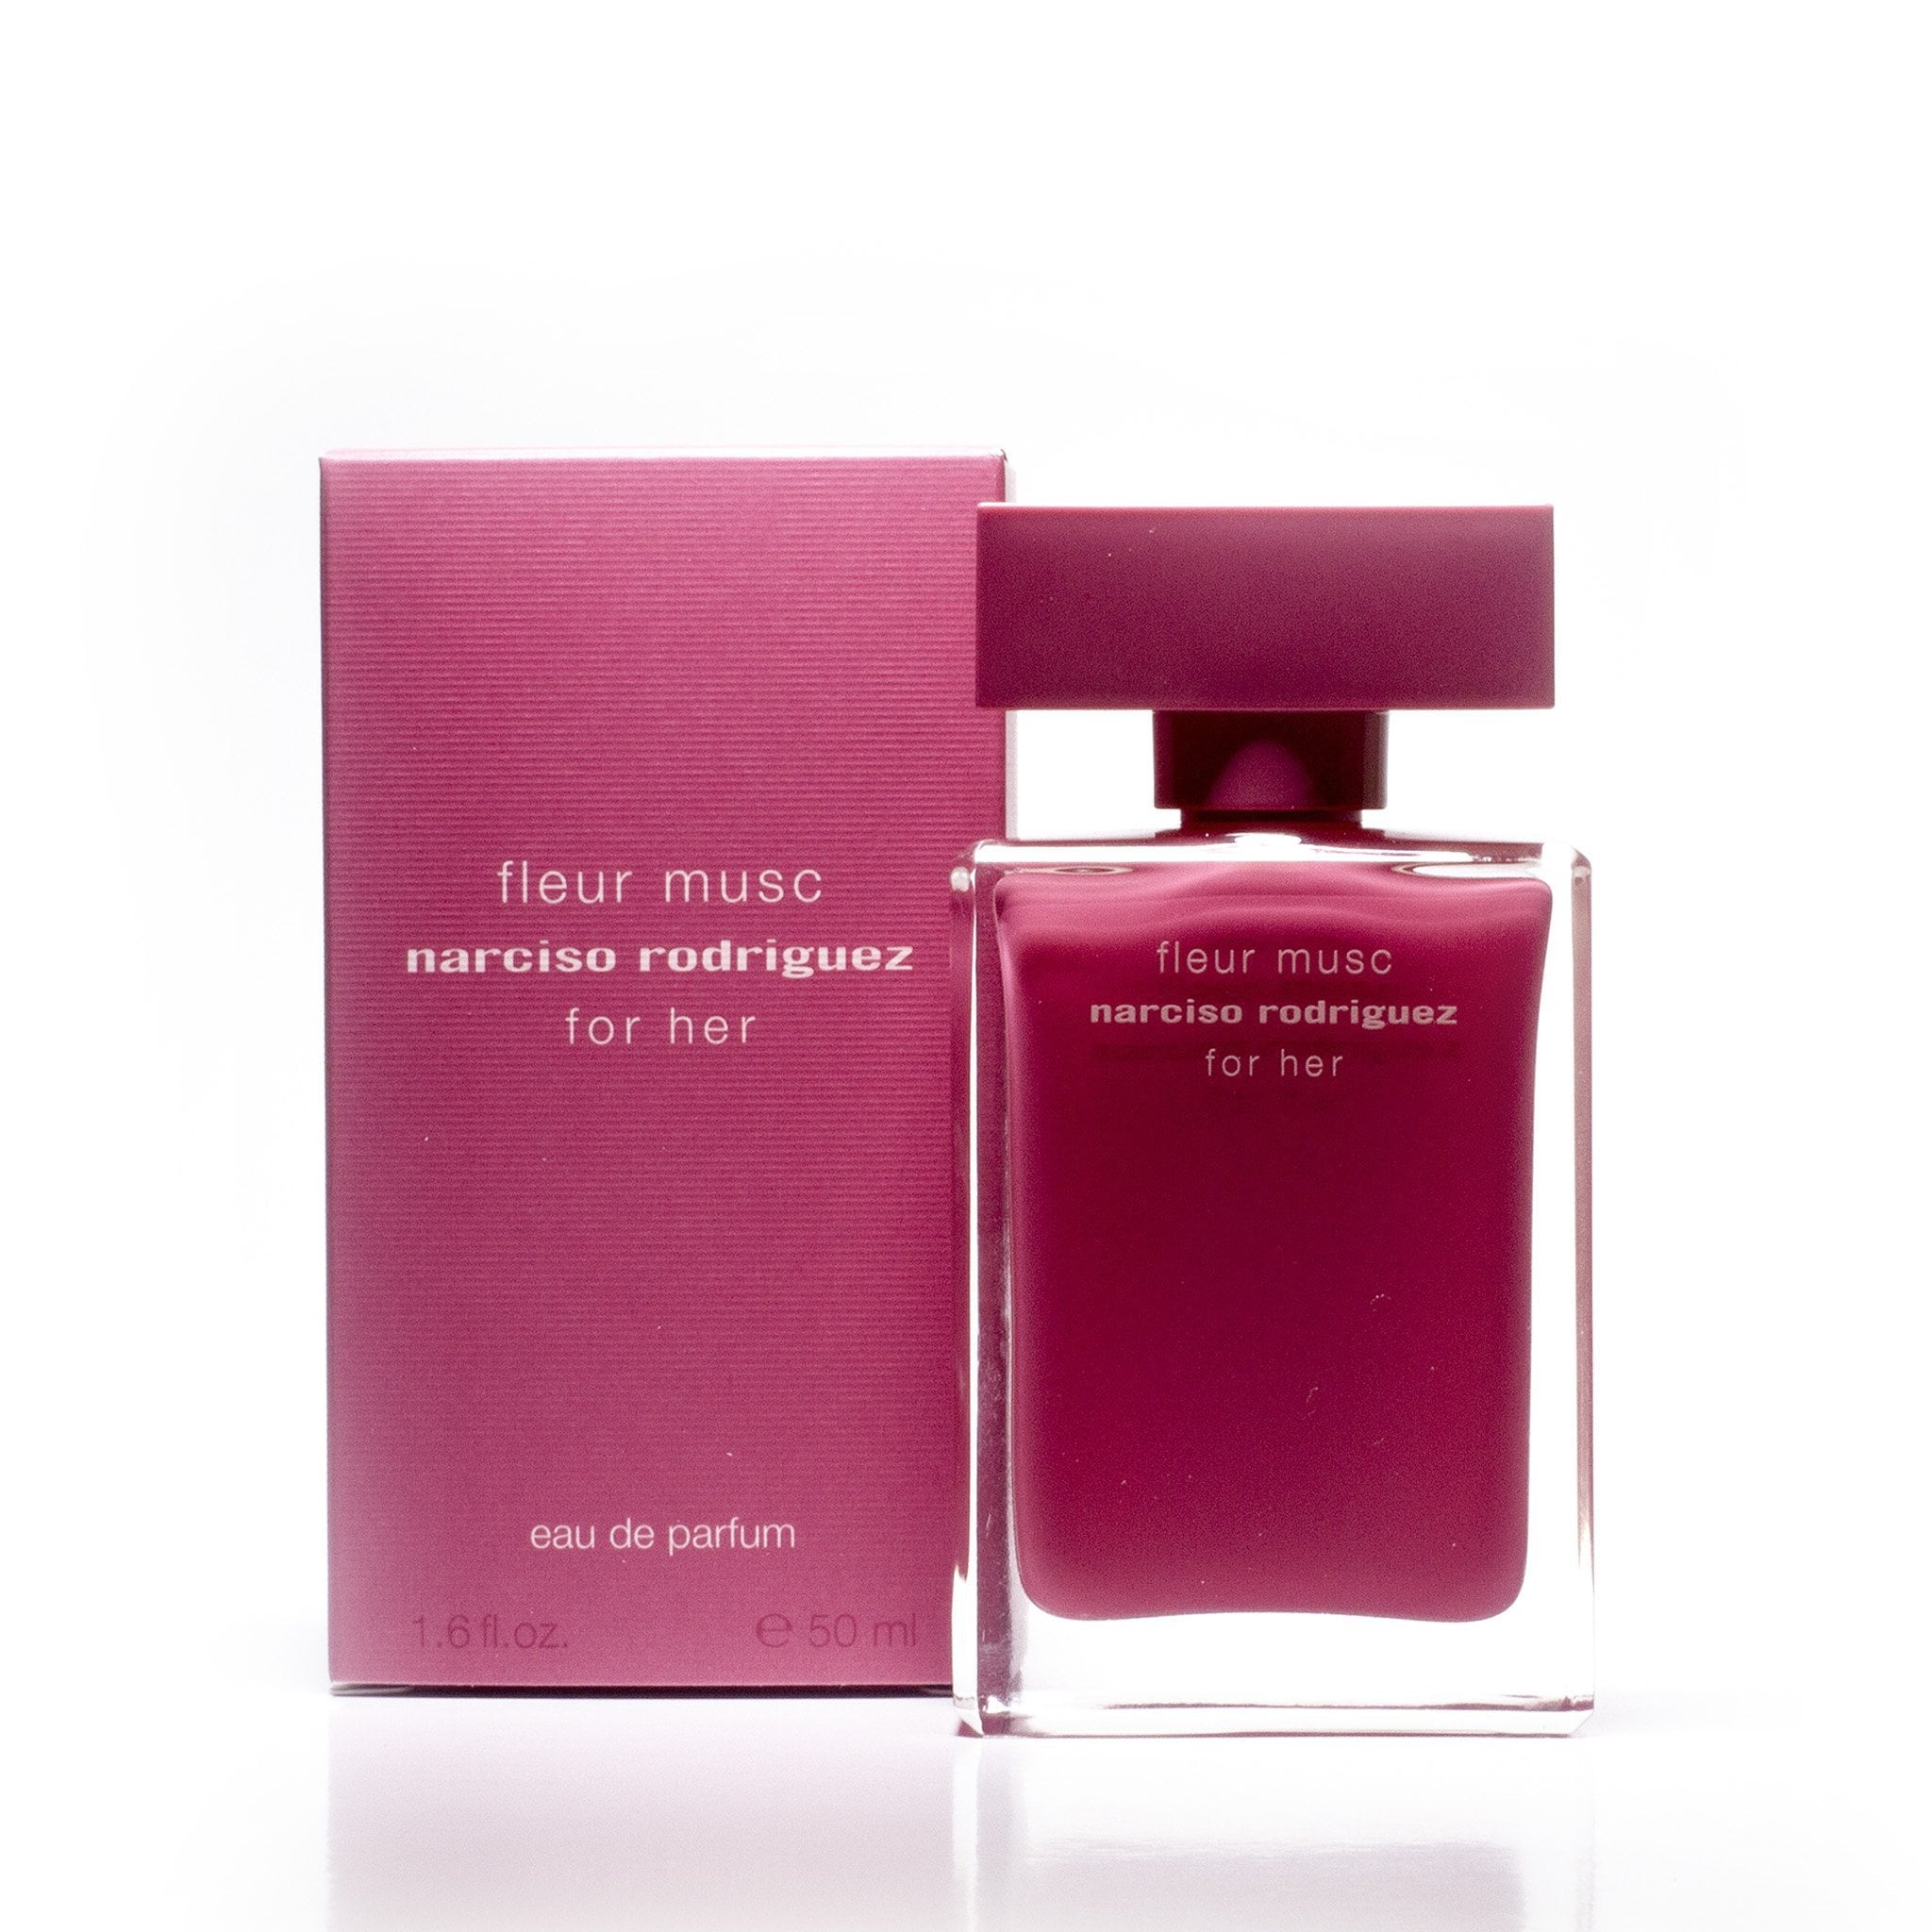 Fleur Musc Narciso Rodriguez for her. Narciso Rodriguez fleur Musc for her Eau de Toilette Florale. Narciso Rodriguez Musc Noir Rose for her. Narciso Rodriguez logo. Родригес флер